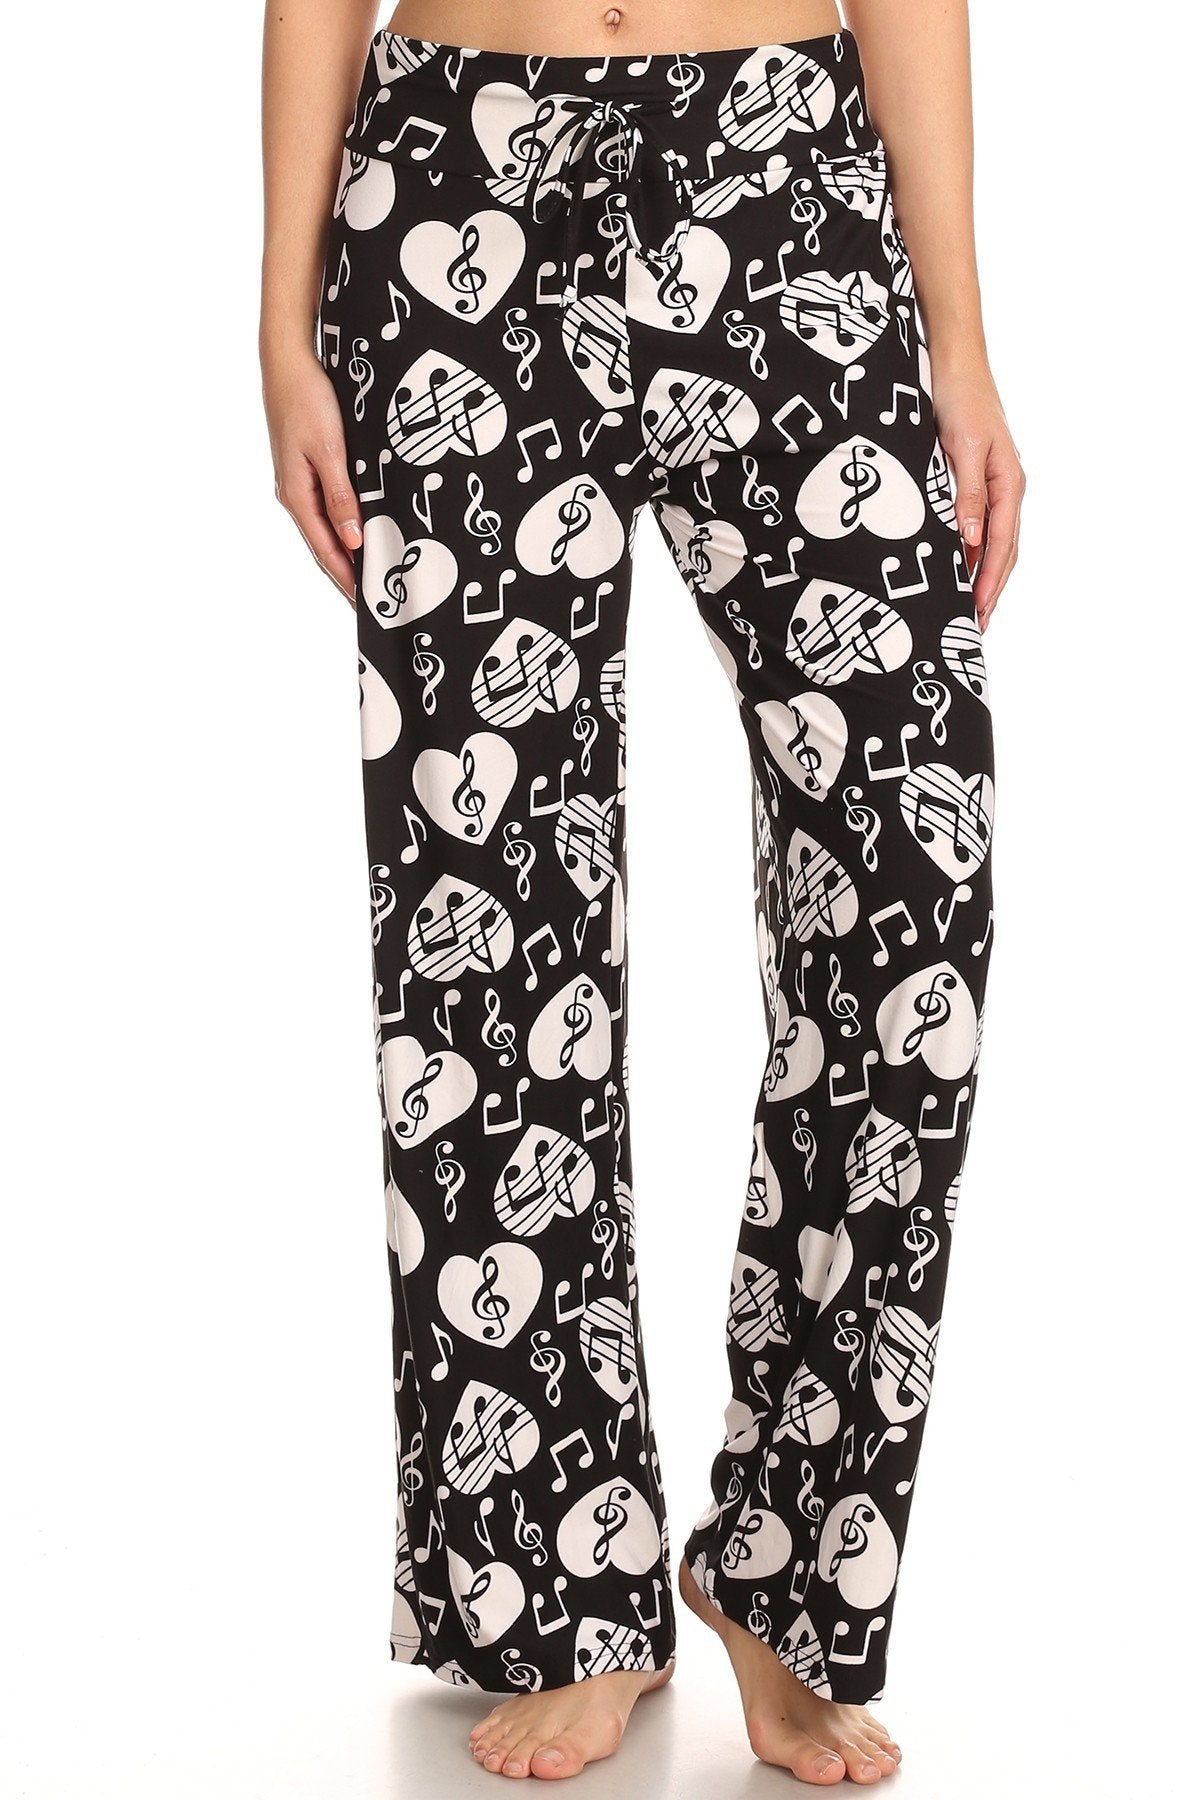 Music Notes Hearts Comfortable Soft Lounge Pajama Pants - SimplyCuteTees